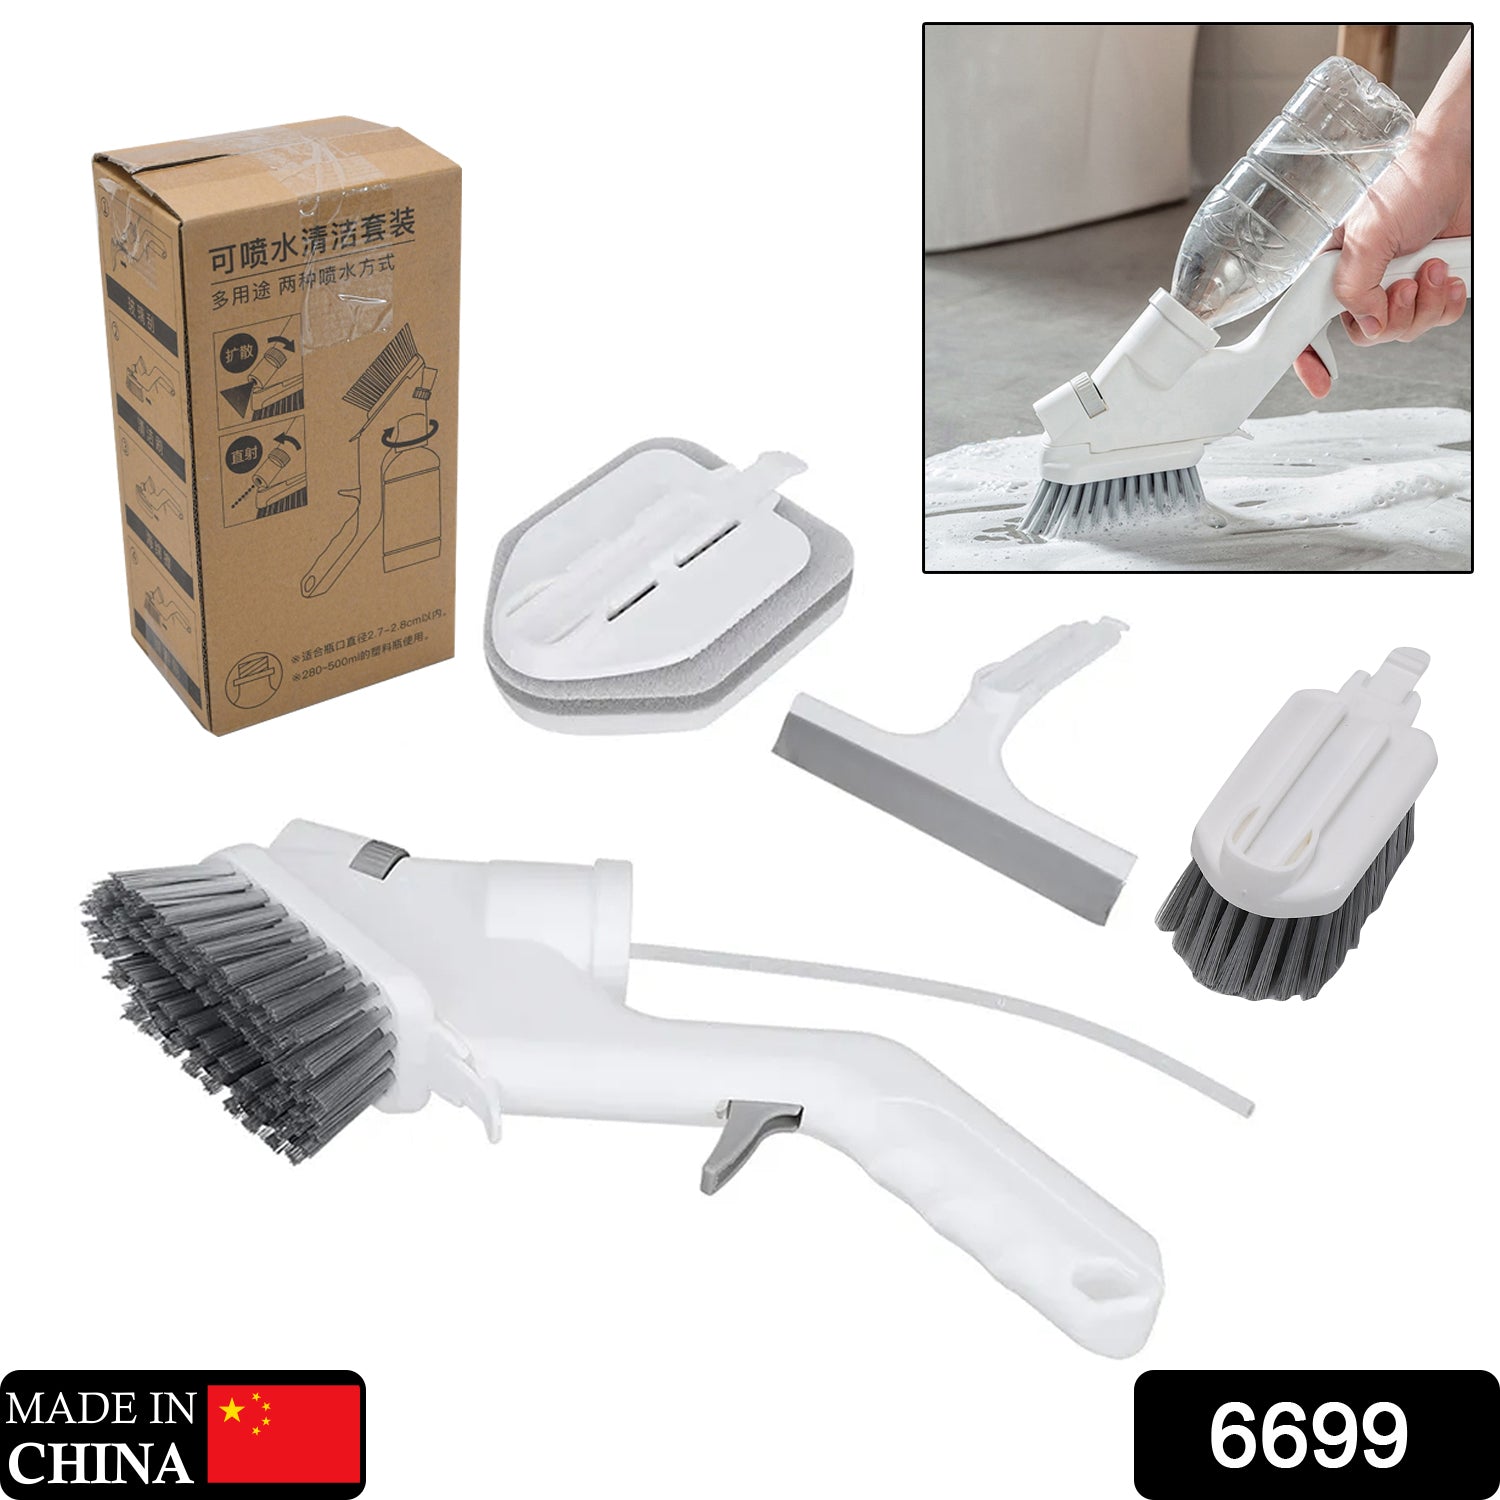 6699 Spray Cleaning Brush, Multifunction Non-Slip Cleaning Brush, Comfortable Handle Durable for Sinks, Gas Stove Clean Tiles Crevices, Window Household Cleaning DeoDap